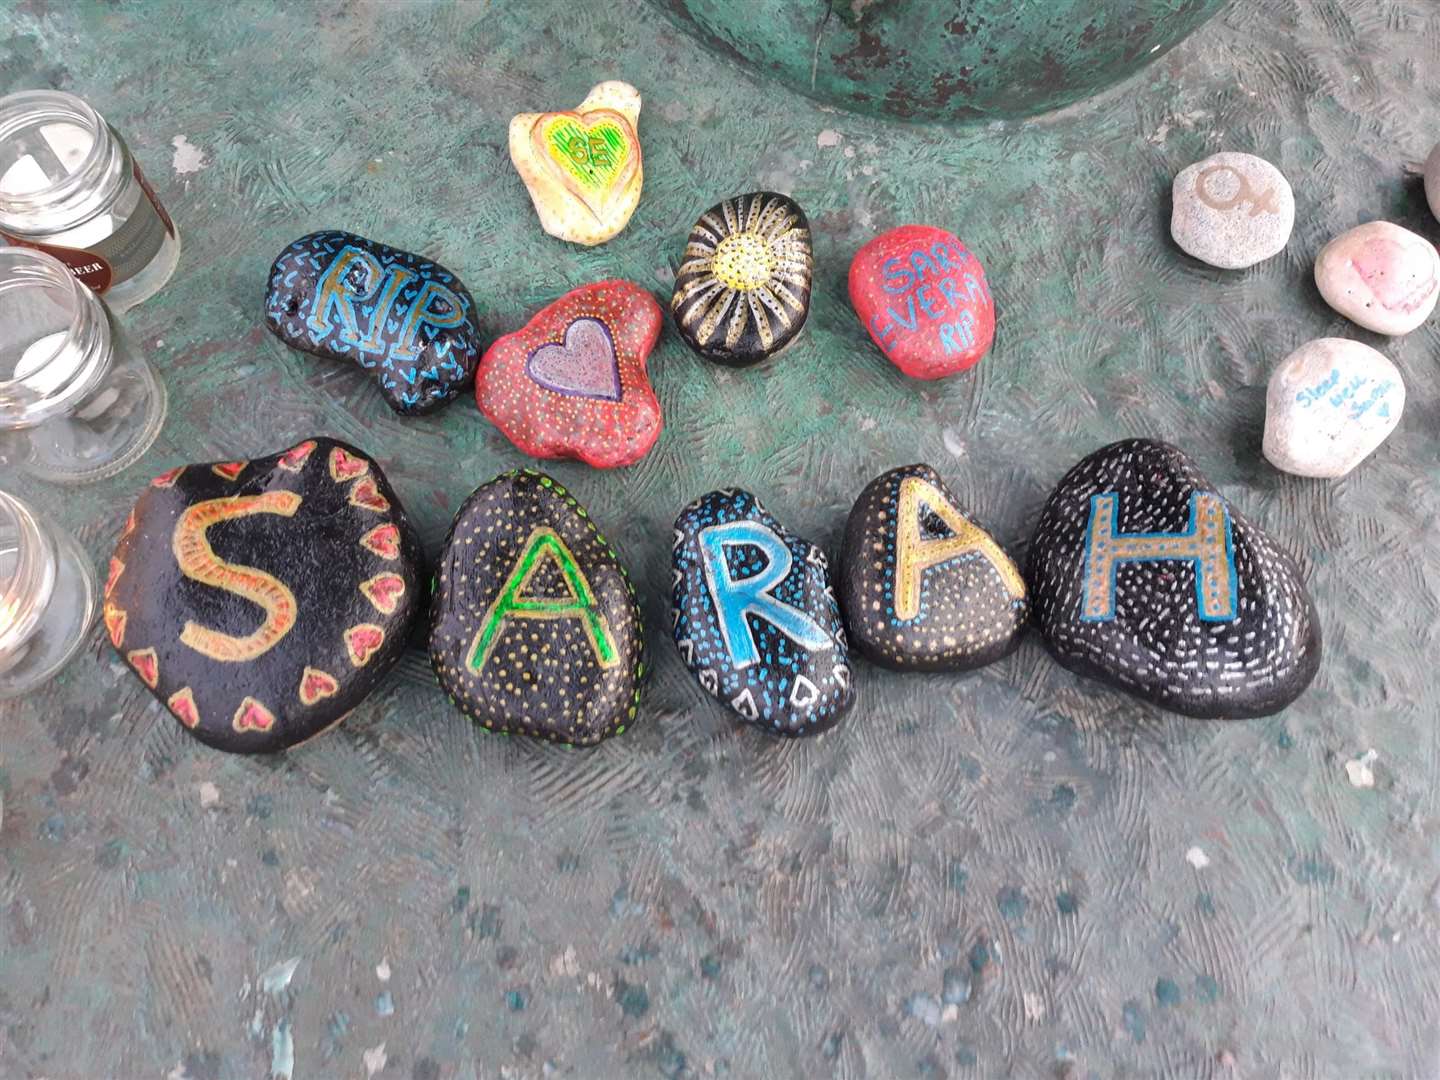 Decorated pebbles in memory of Sarah Everard in Deal last week. Picture provided by Susan Carlyle